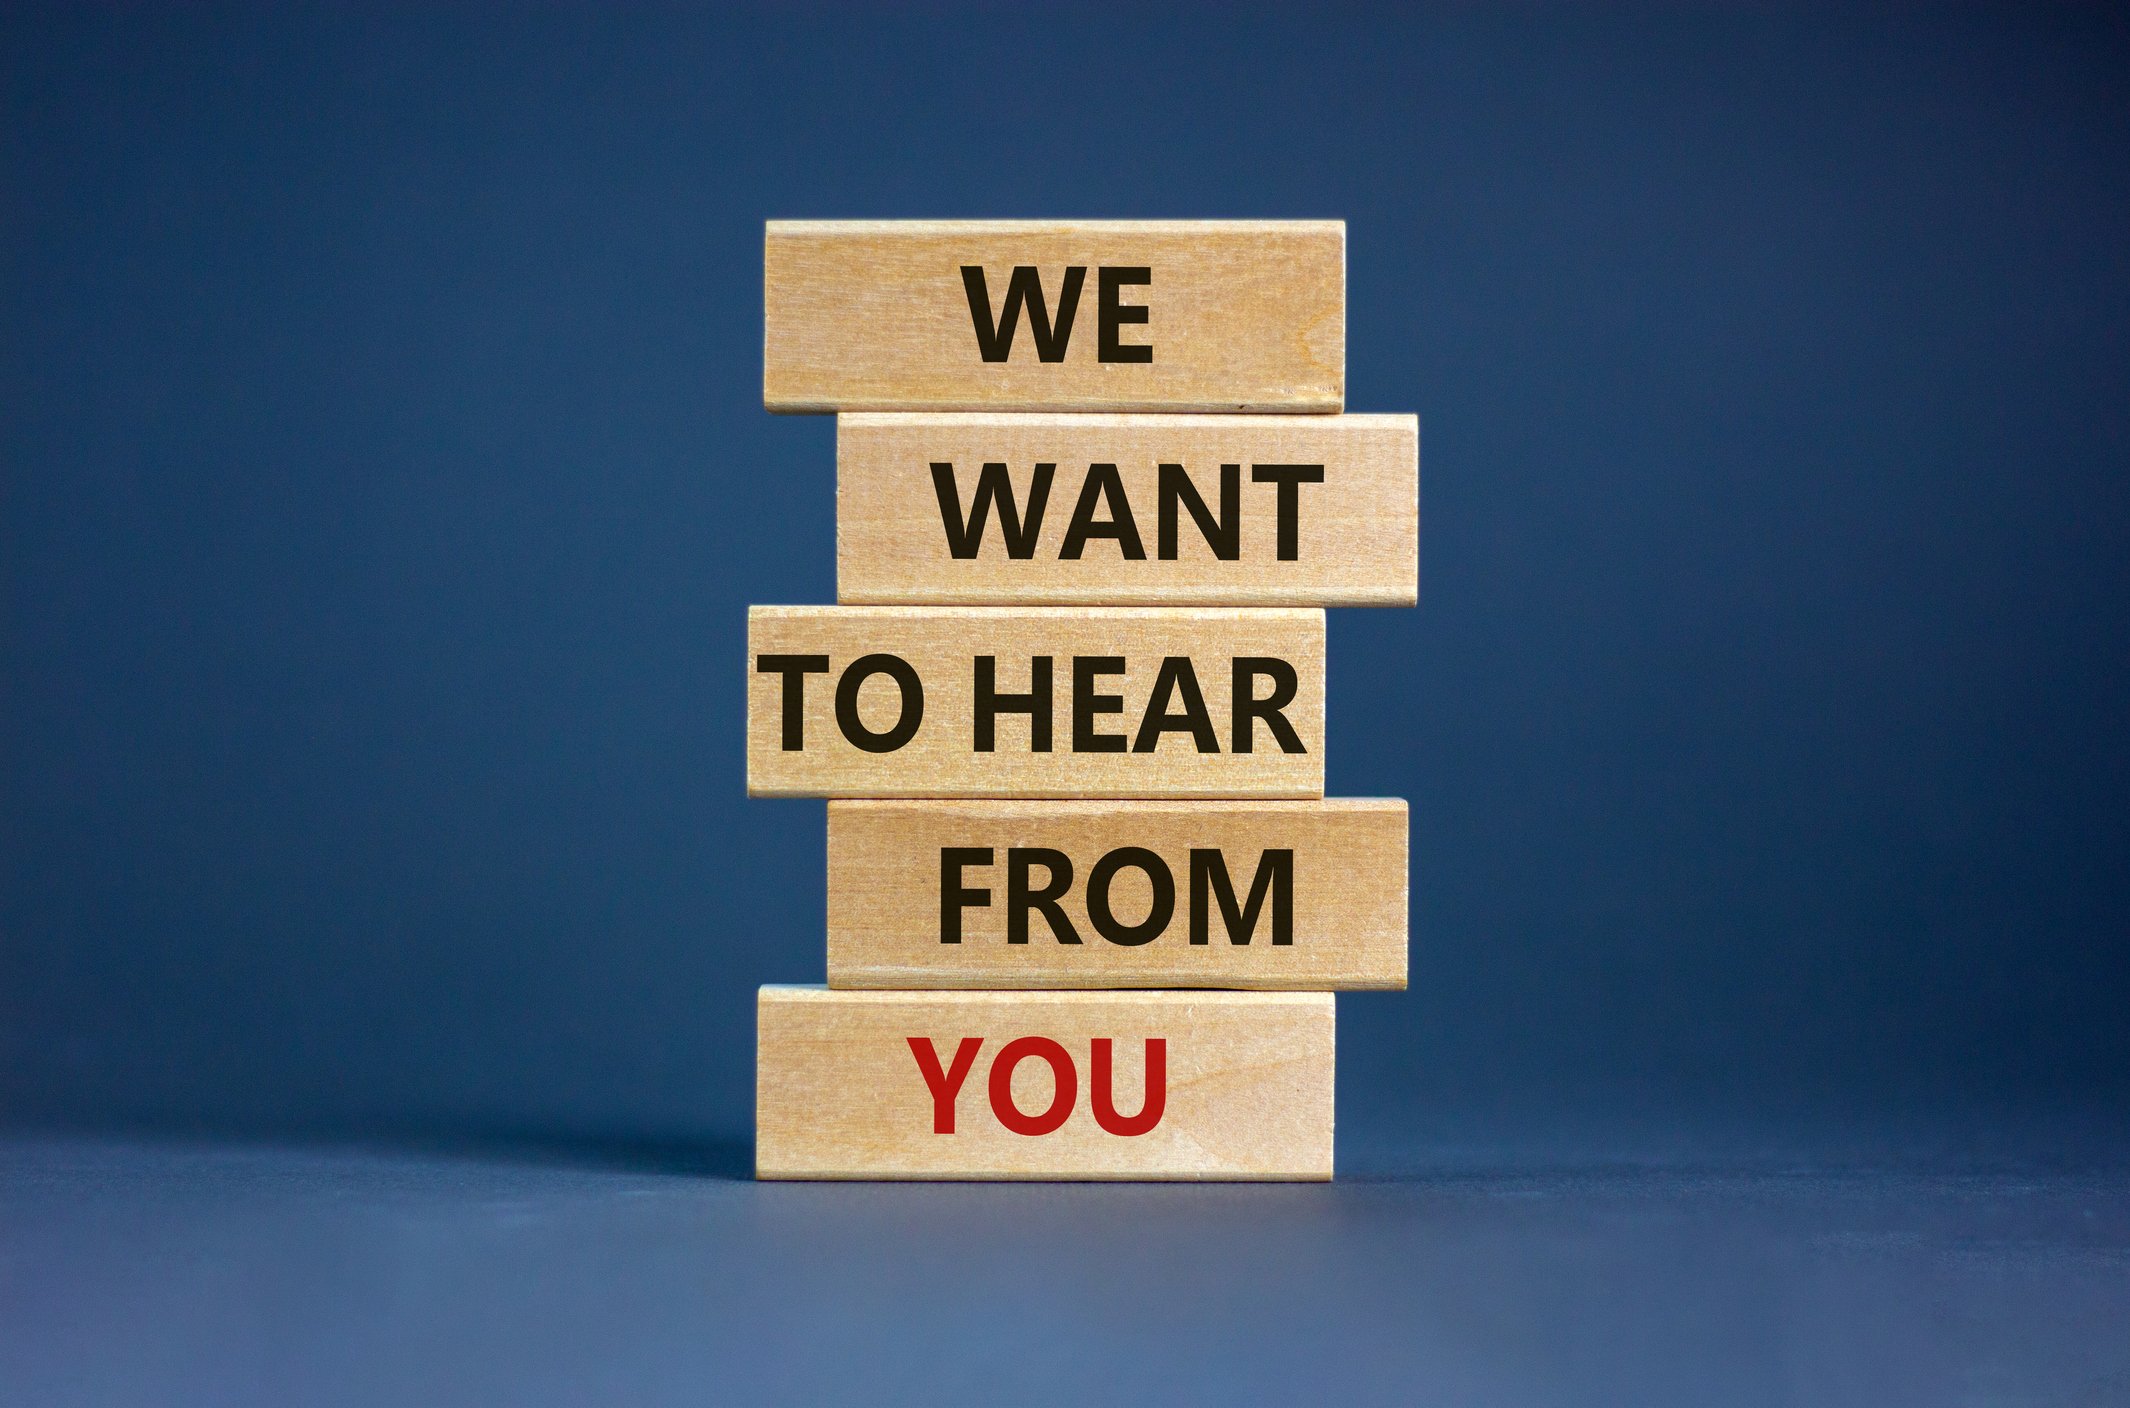 We_want_to_hear_from_you [istock]